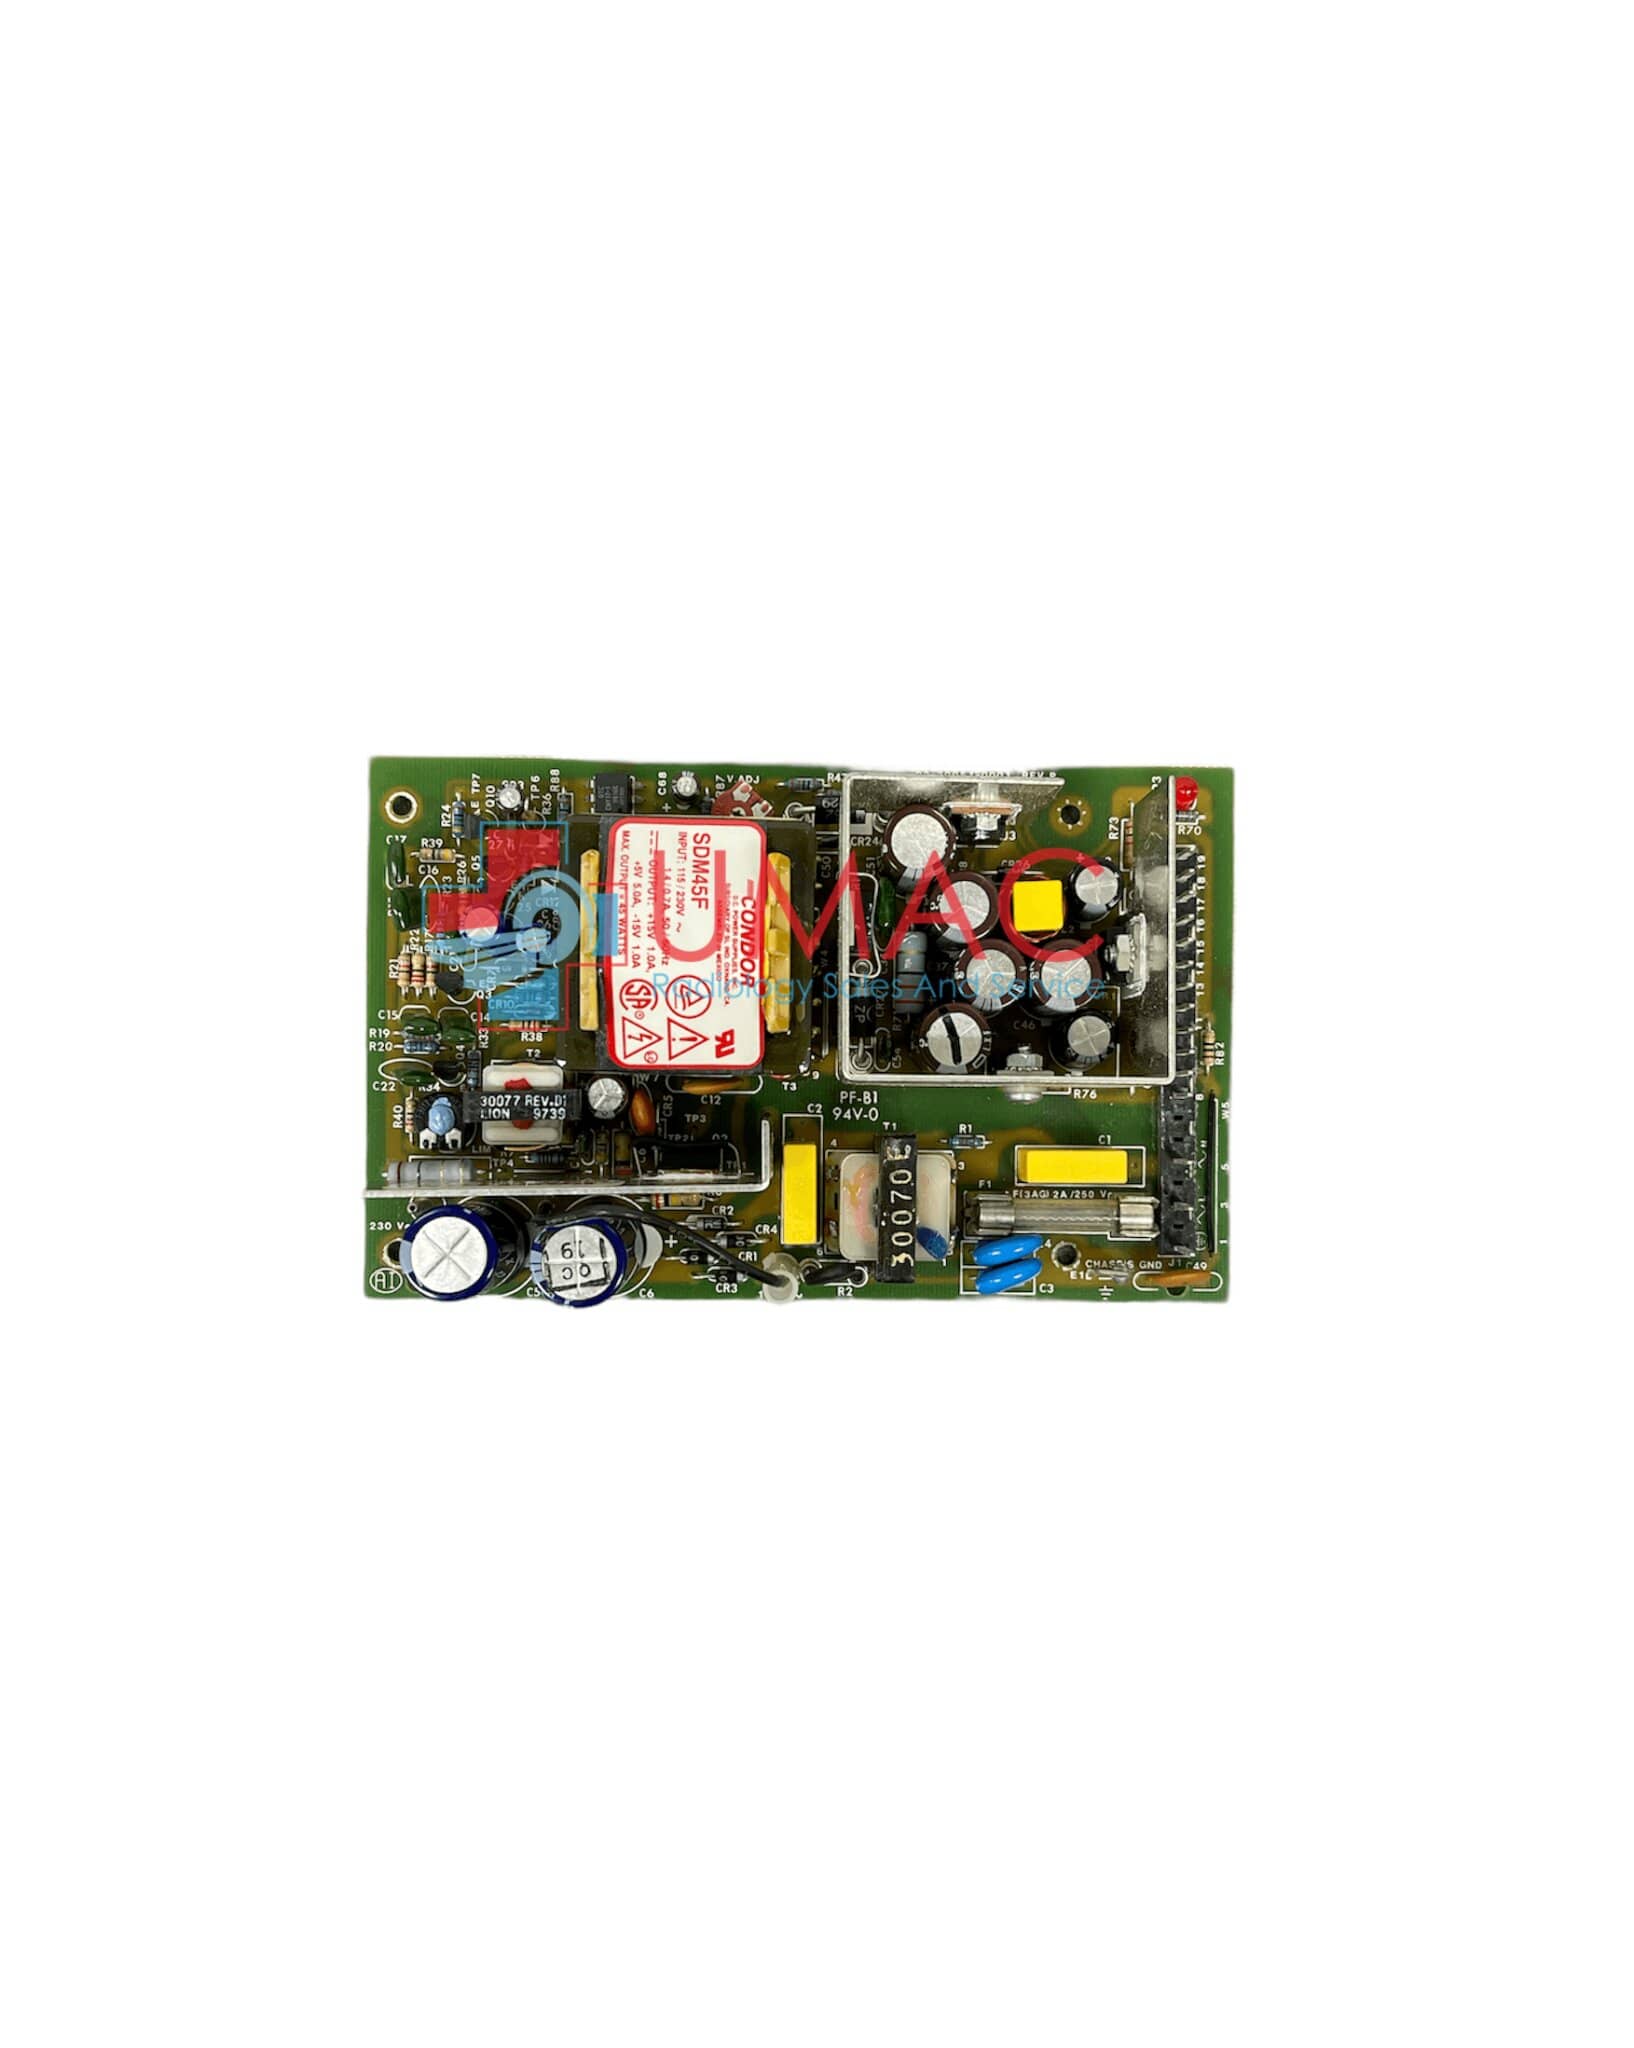 Hologic Lorad M-IV Mammography 02-30051-0001 Low Voltage Power Supply Board for Lorad